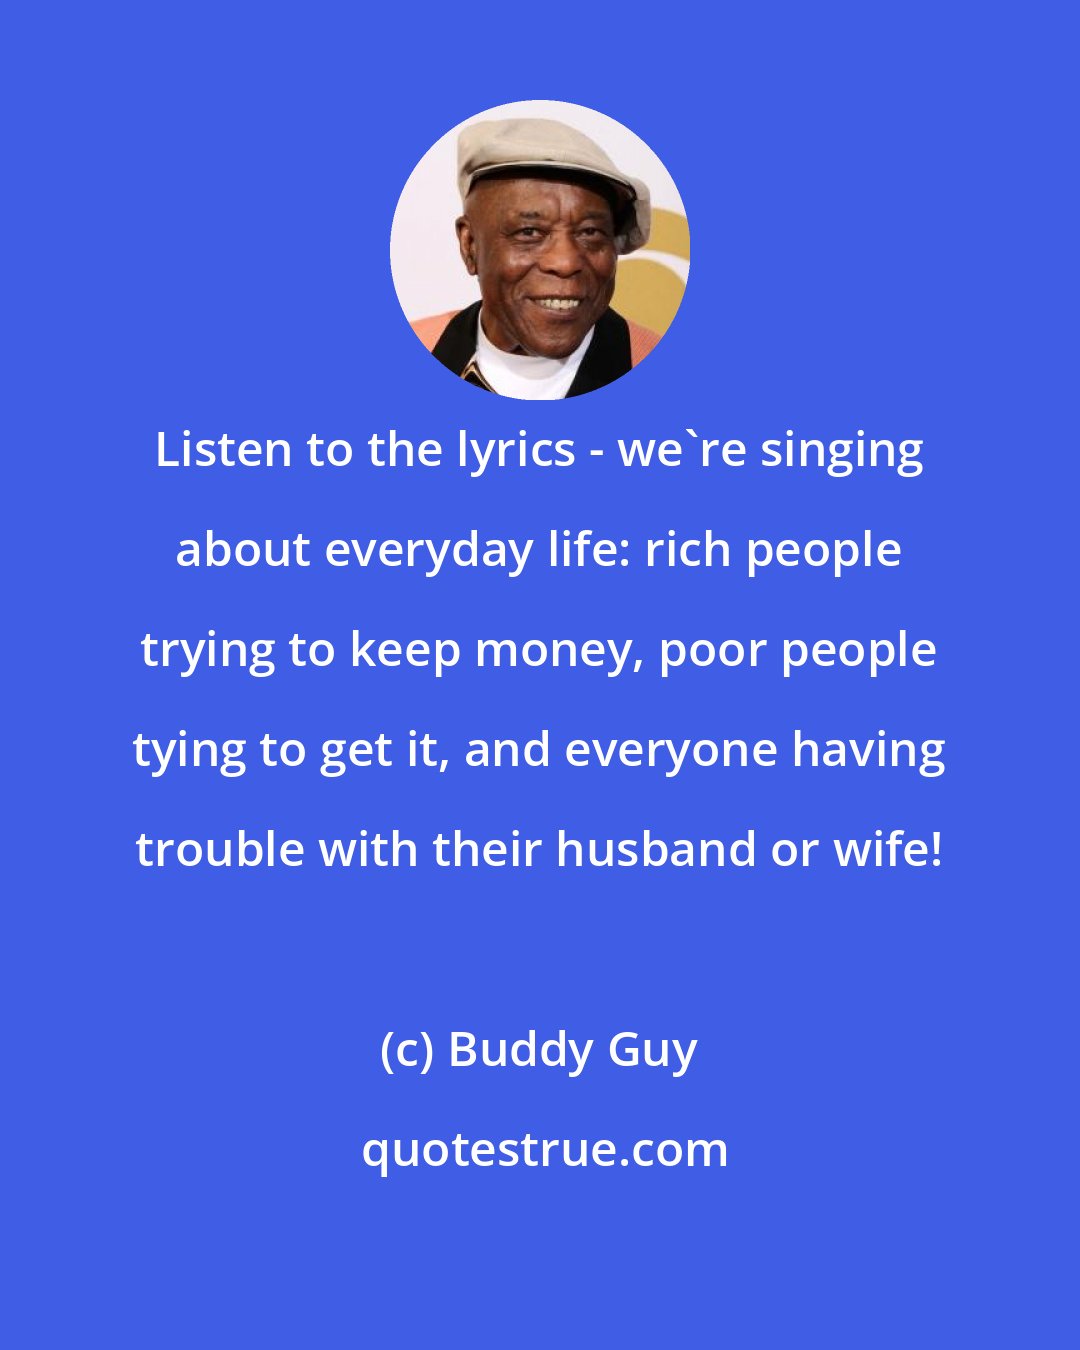 Buddy Guy: Listen to the lyrics - we're singing about everyday life: rich people trying to keep money, poor people tying to get it, and everyone having trouble with their husband or wife!